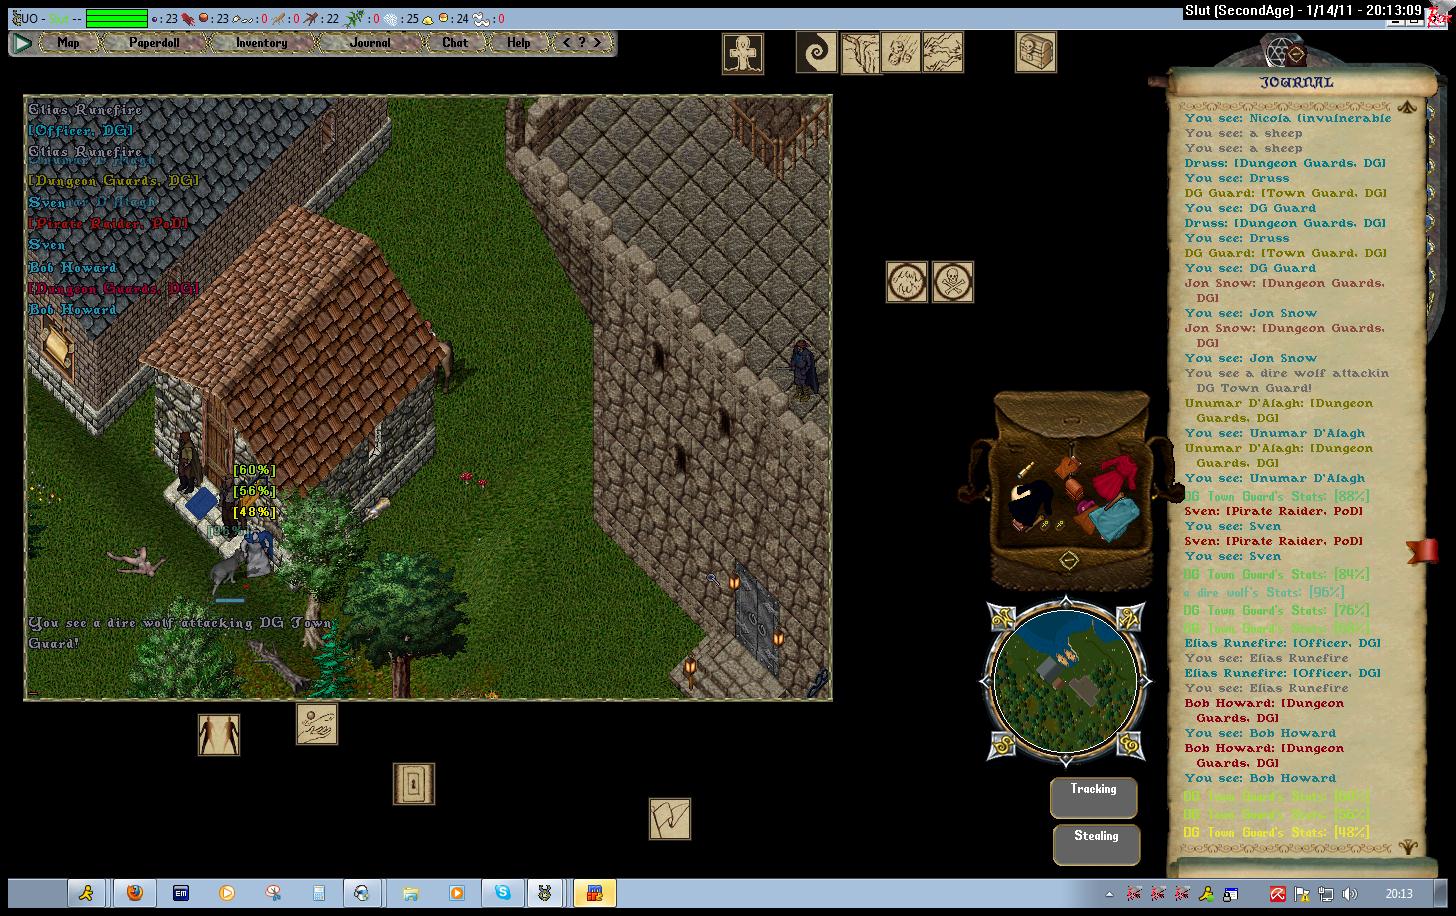 Pic Of the Day for Sunday, February 6, 2011!
Dg town guard falls to direwolf while town members do nothing